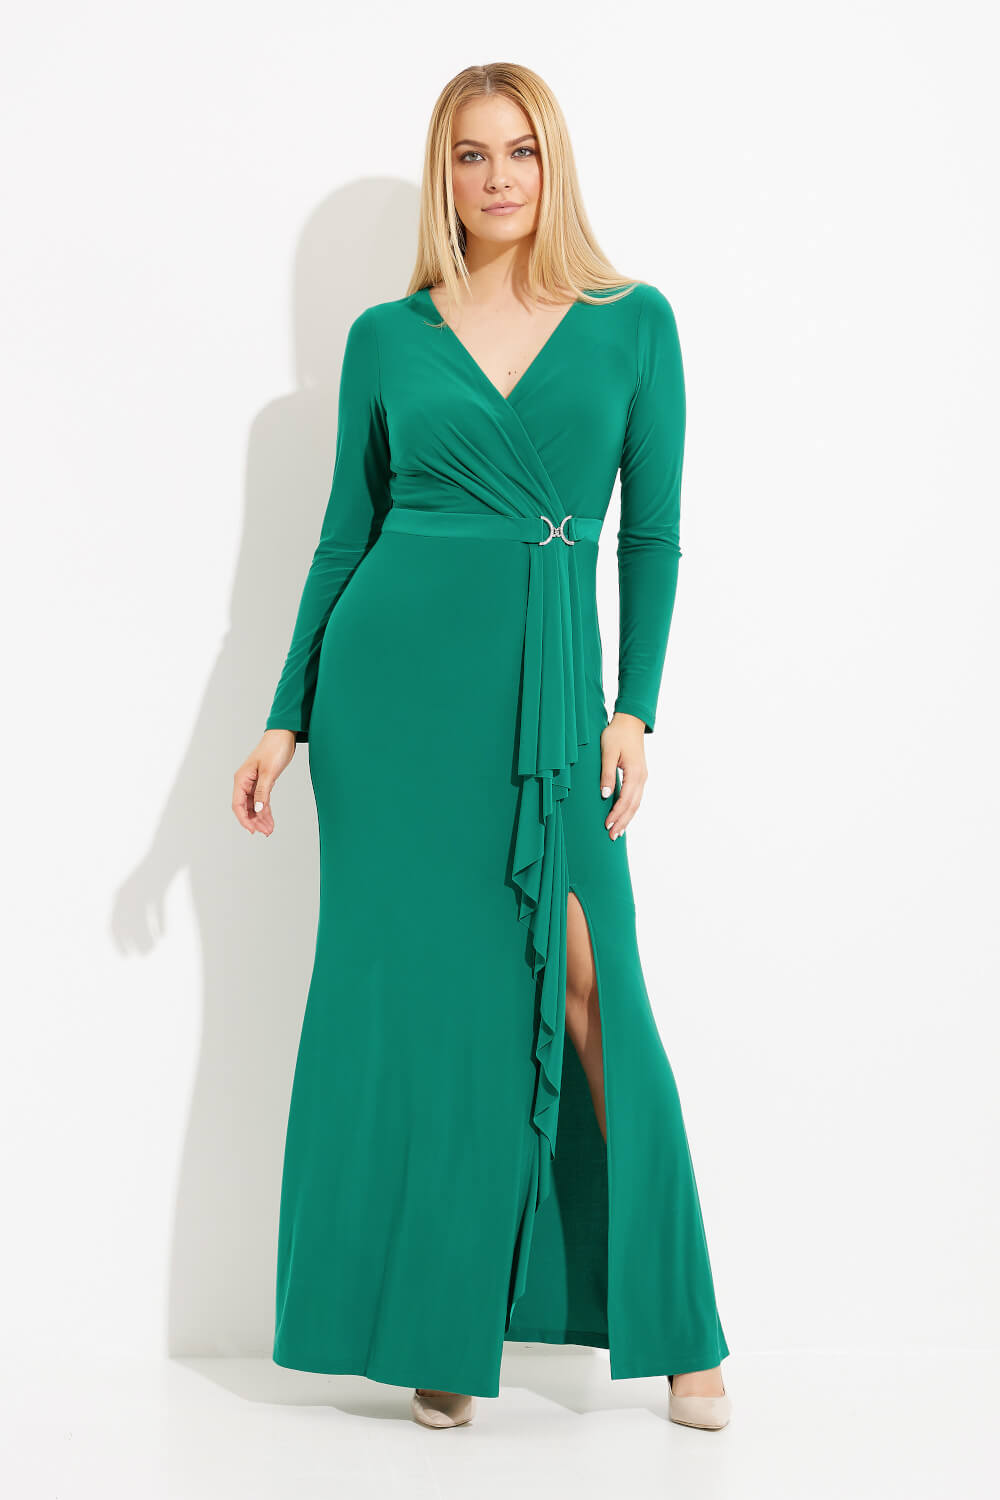 Belted Dress with slit Style 233788. True Emerald